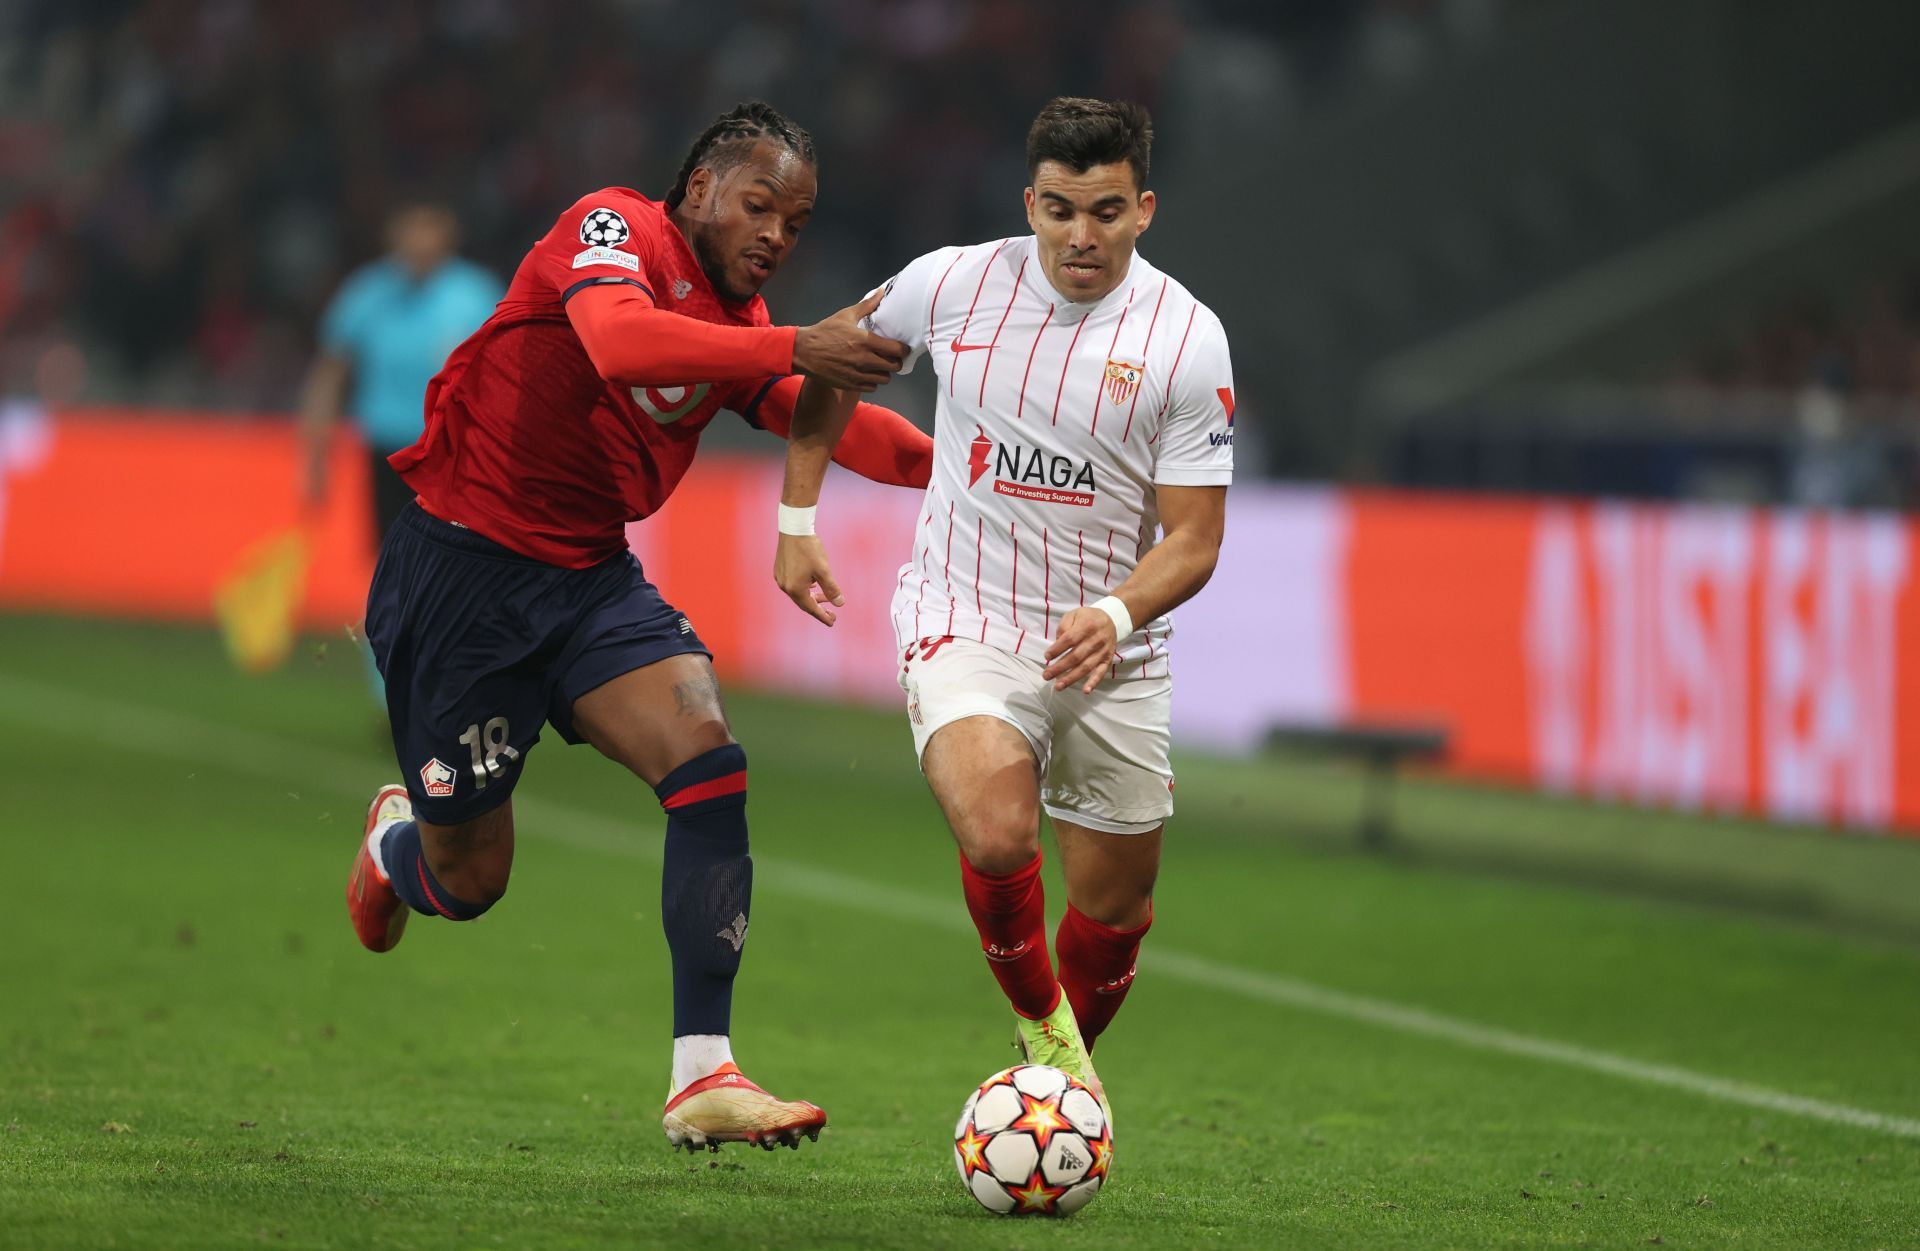 Acuna fighting for the ball against Lille - UEFA Champions League